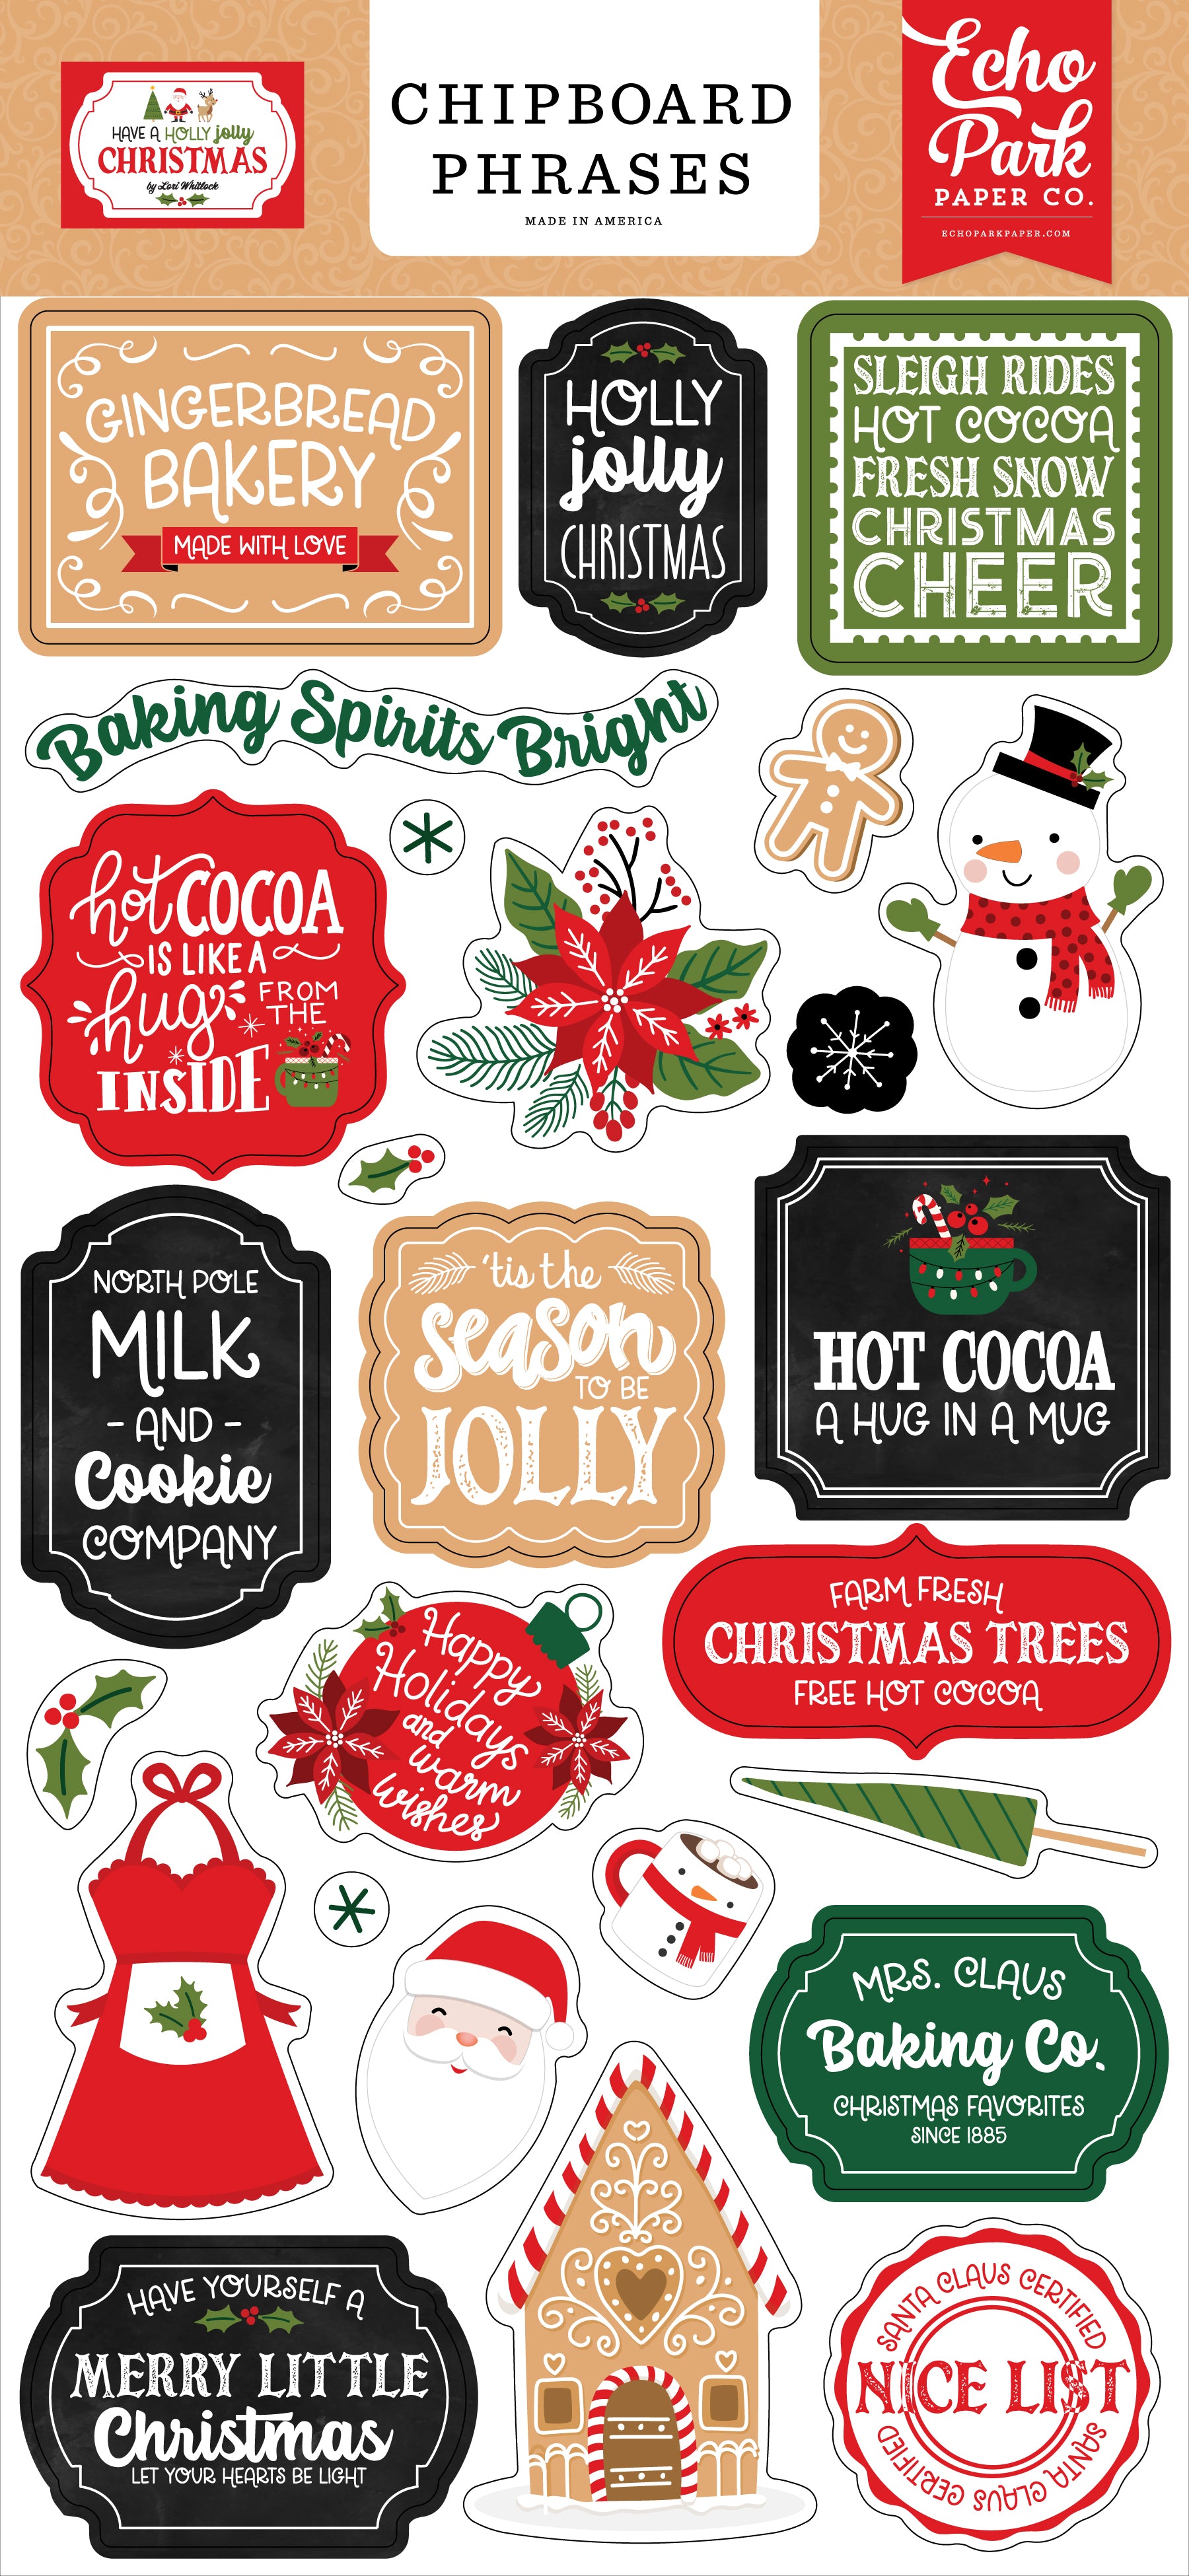 Have A Holly Jolly Christmas Collection 6 x 12 Scrapbook Chipboard Phrases by Echo Park Paper